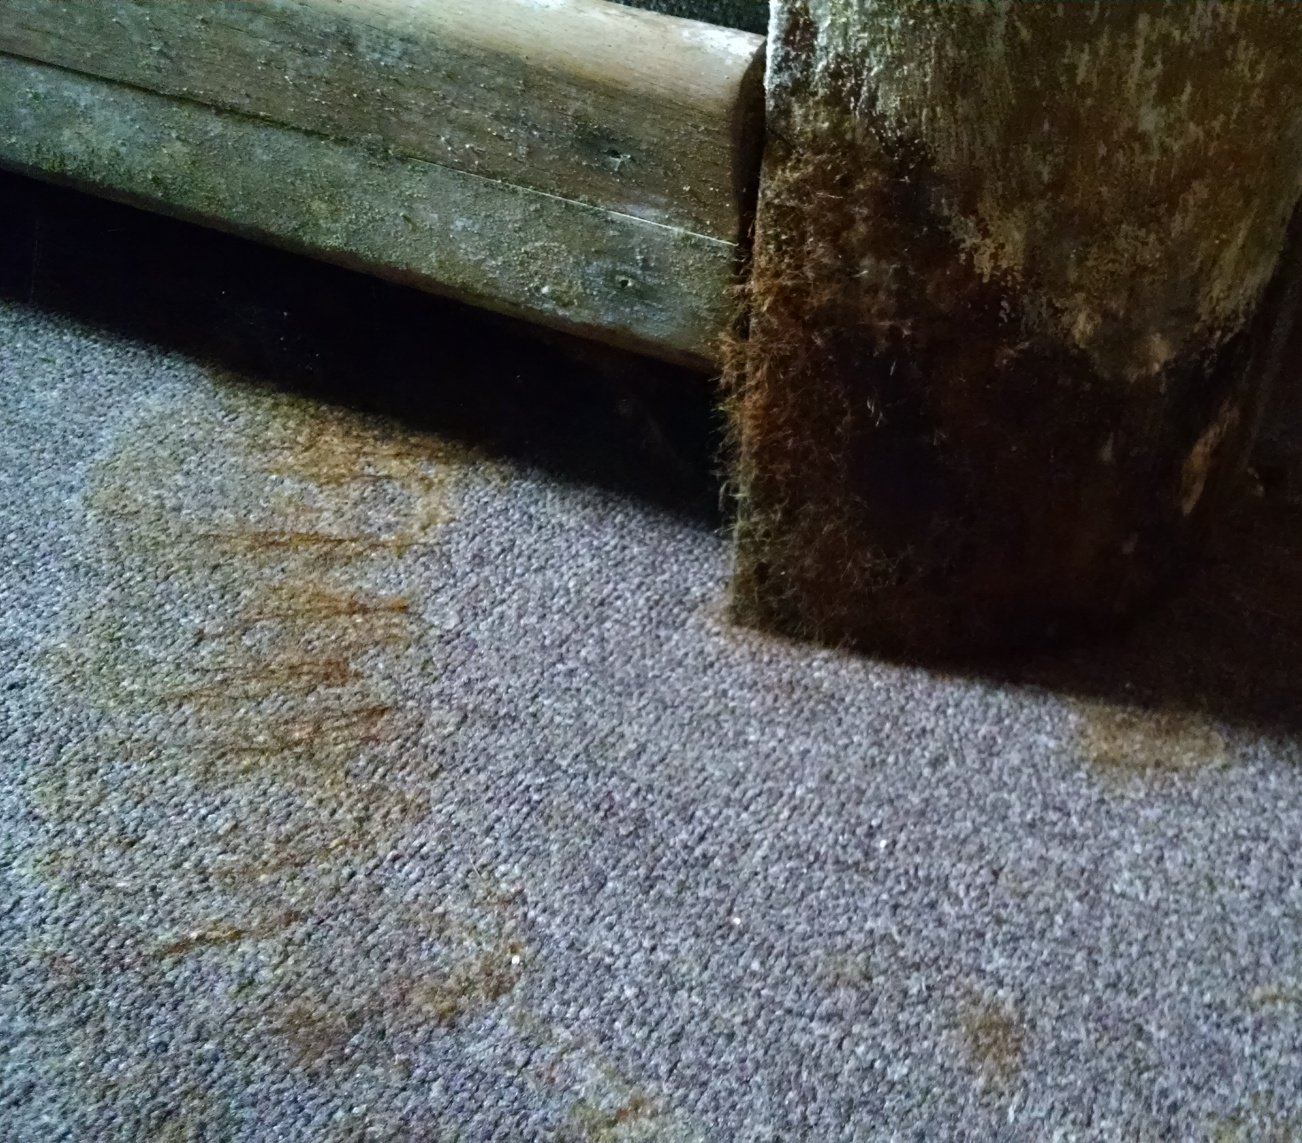 mold on carpet and bookcase